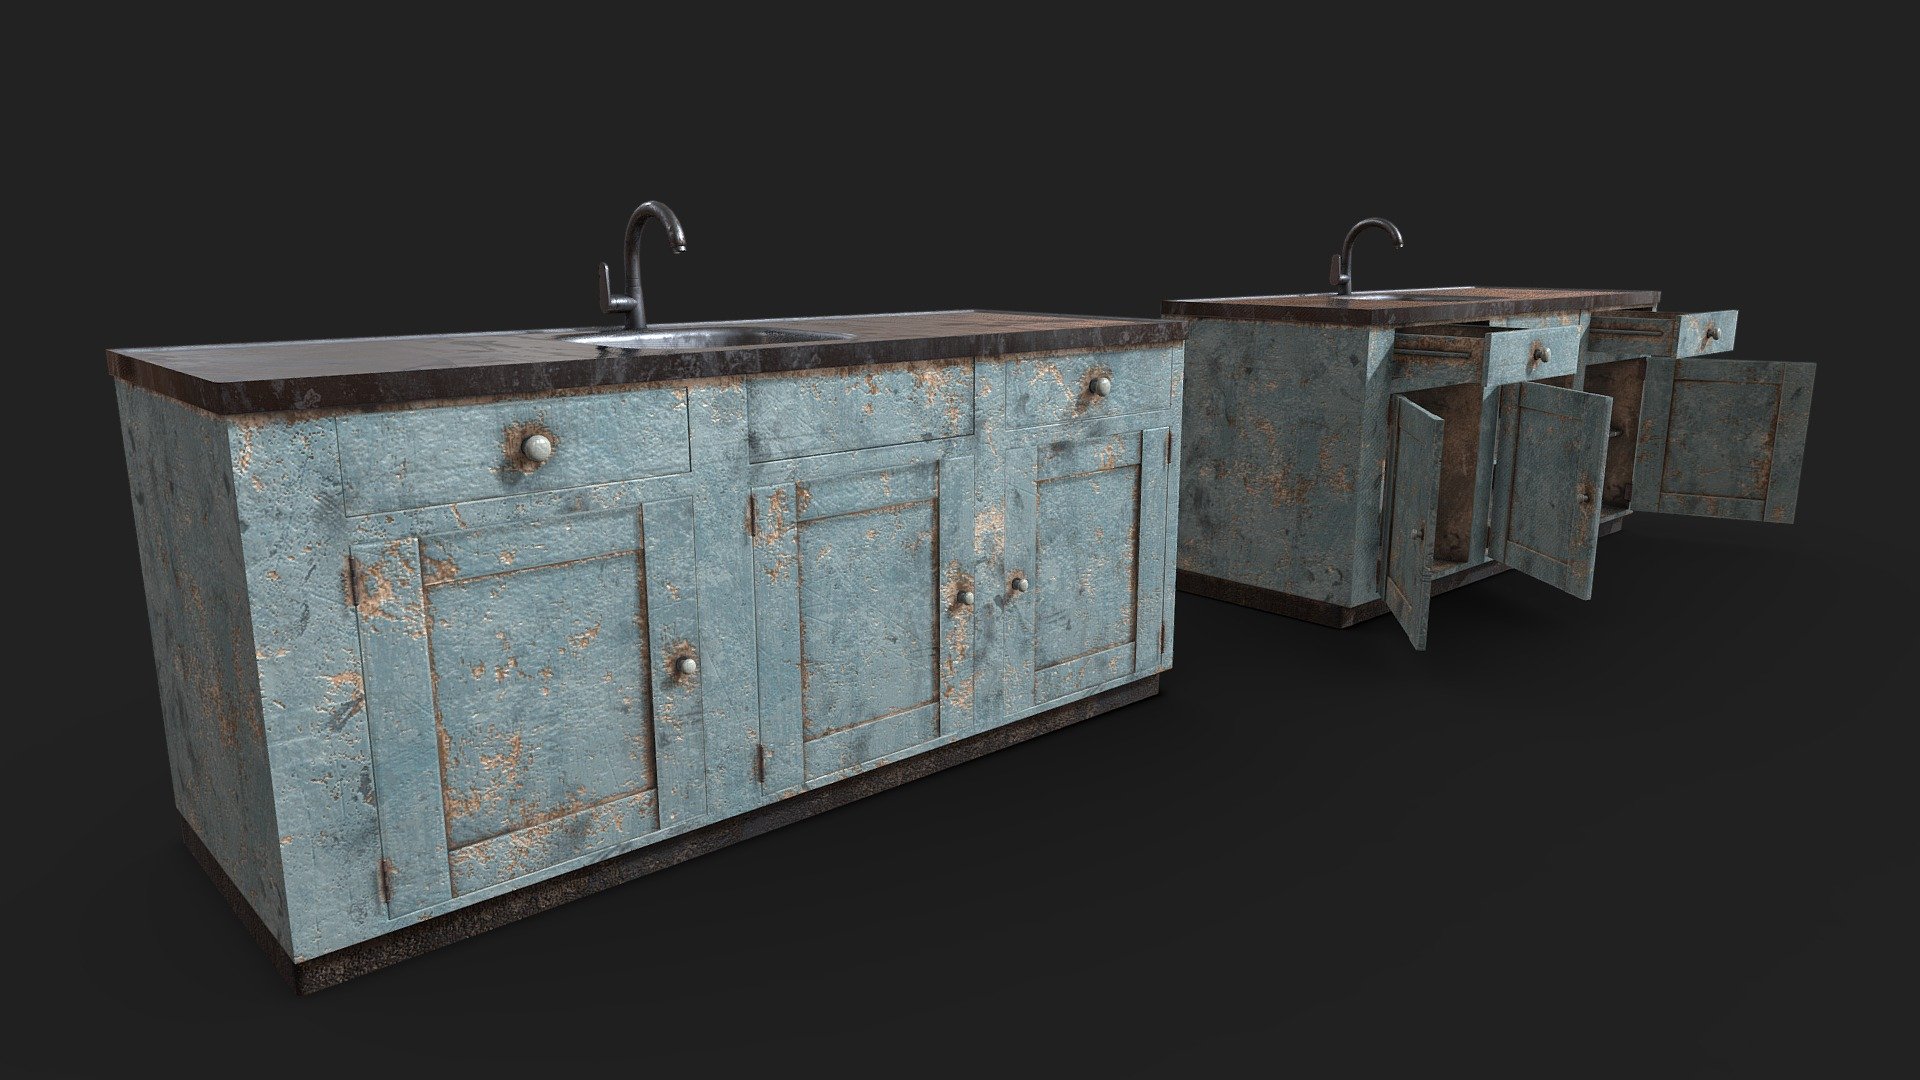 The drawers and doors are separated from the cabinets and openable.

2 materials with 2048x2048 textures packs (PBR Metal Rough, Unity HDRP, Unity Standard Metallic and UE4):

PBR Metal Rough- BaseColor, AO, Height, Normal, Roughness and Metallic;

Unity HDRP: BaseColor, MaskMap, Normal;

Unity Standard Metallic: AlbedoTransparency, MetallicSmoothness, Normal;

Unreal Engine 4: BaseColor, Normal, OcclusionRoughnessMetallic;

The package also has the .fbx, .obj, .dae and .blend file 3d model